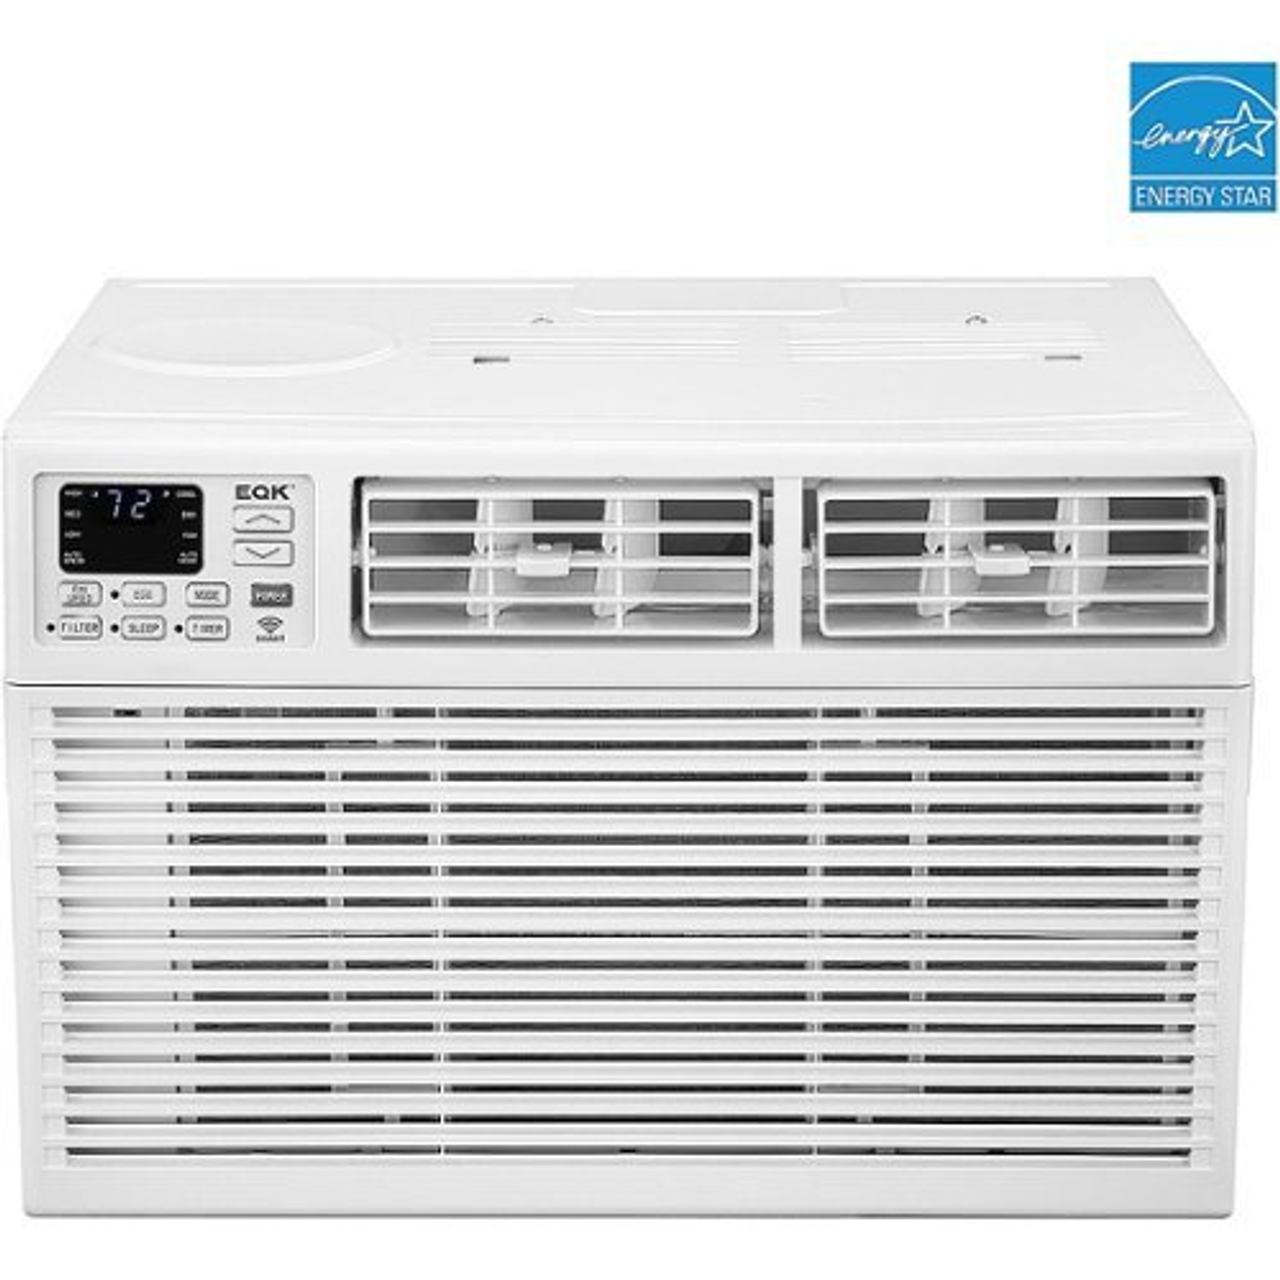 Emerson Quiet Kool SMART 15,000 BTU 115V Window Air Conditioner with Remote, Wi-Fi, and Voice Control - White